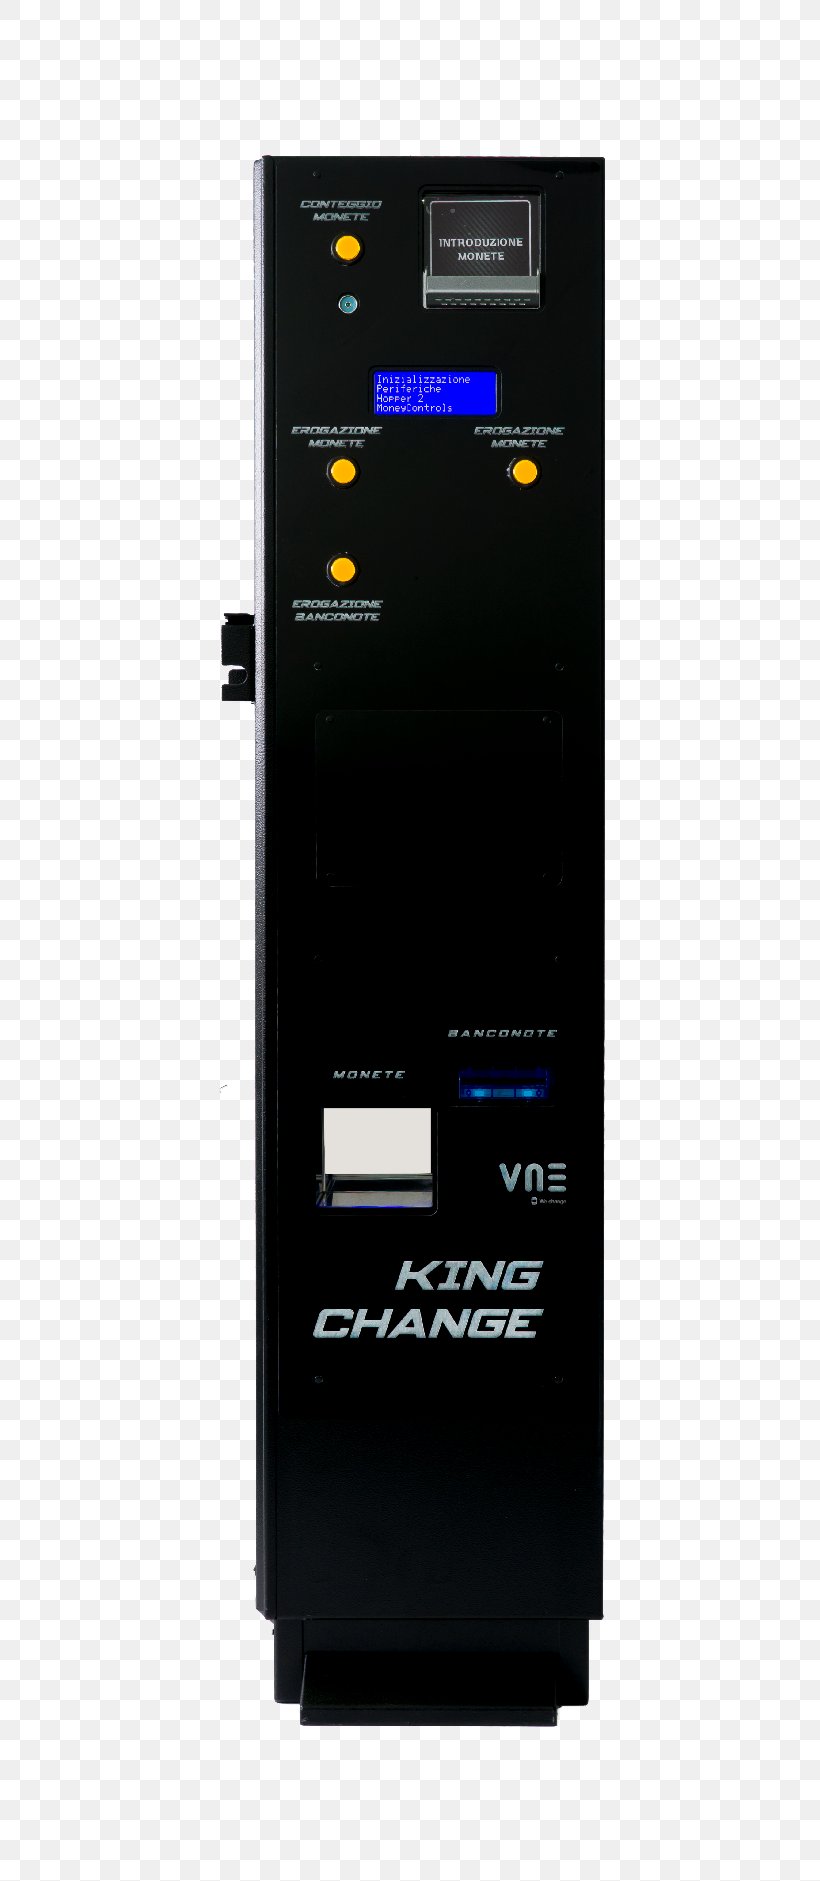 Coin Banknote Change Machine Product Money, PNG, 700x1881px, Coin, Banknote, Change Machine, Credit, Gambling Download Free